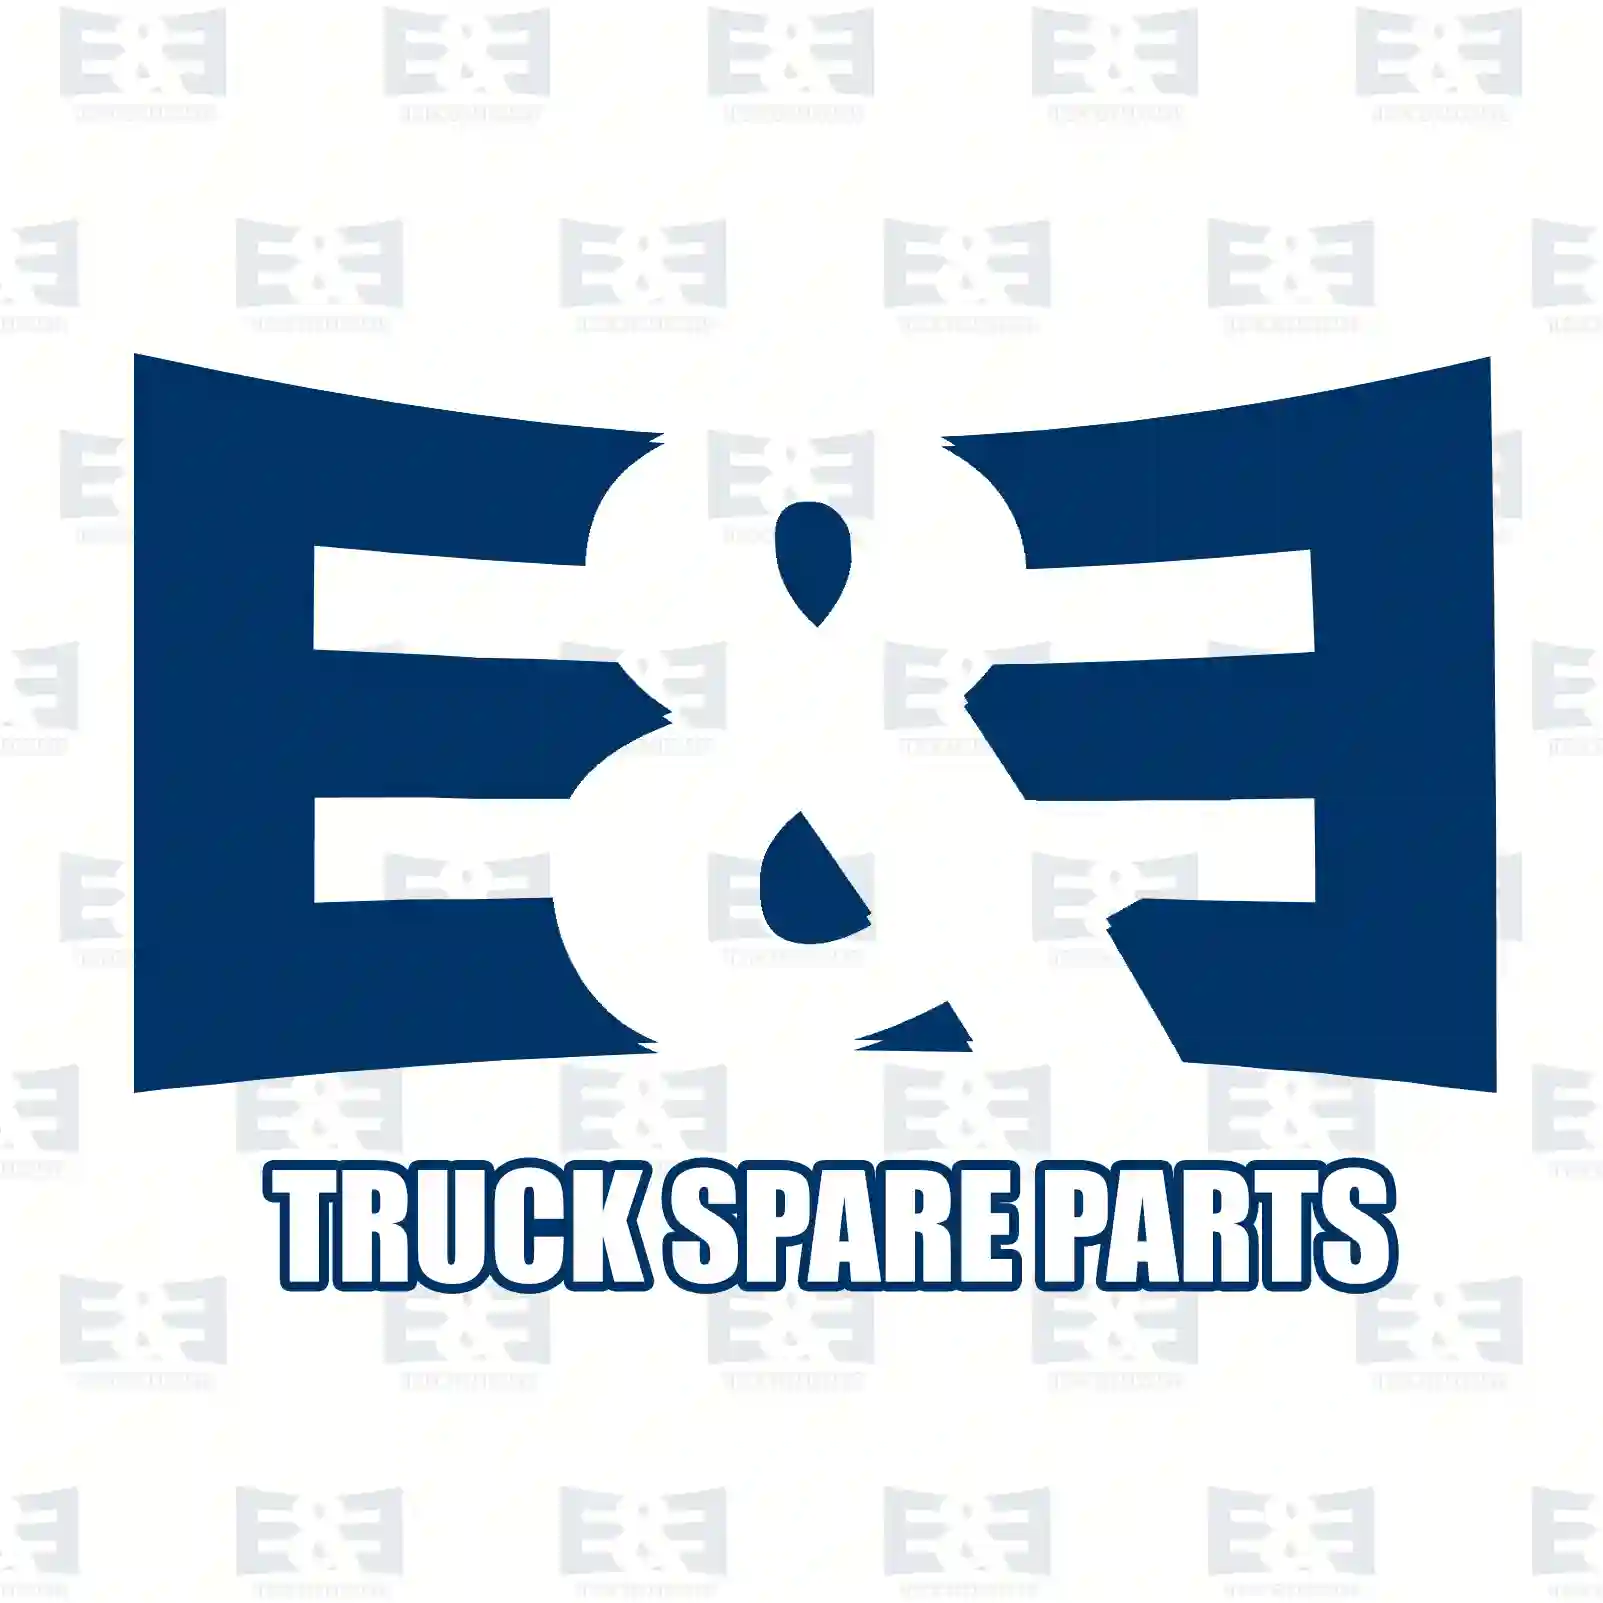  Oil filter, retarder, with seal rings || E&E Truck Spare Parts | Truck Spare Parts, Auotomotive Spare Parts